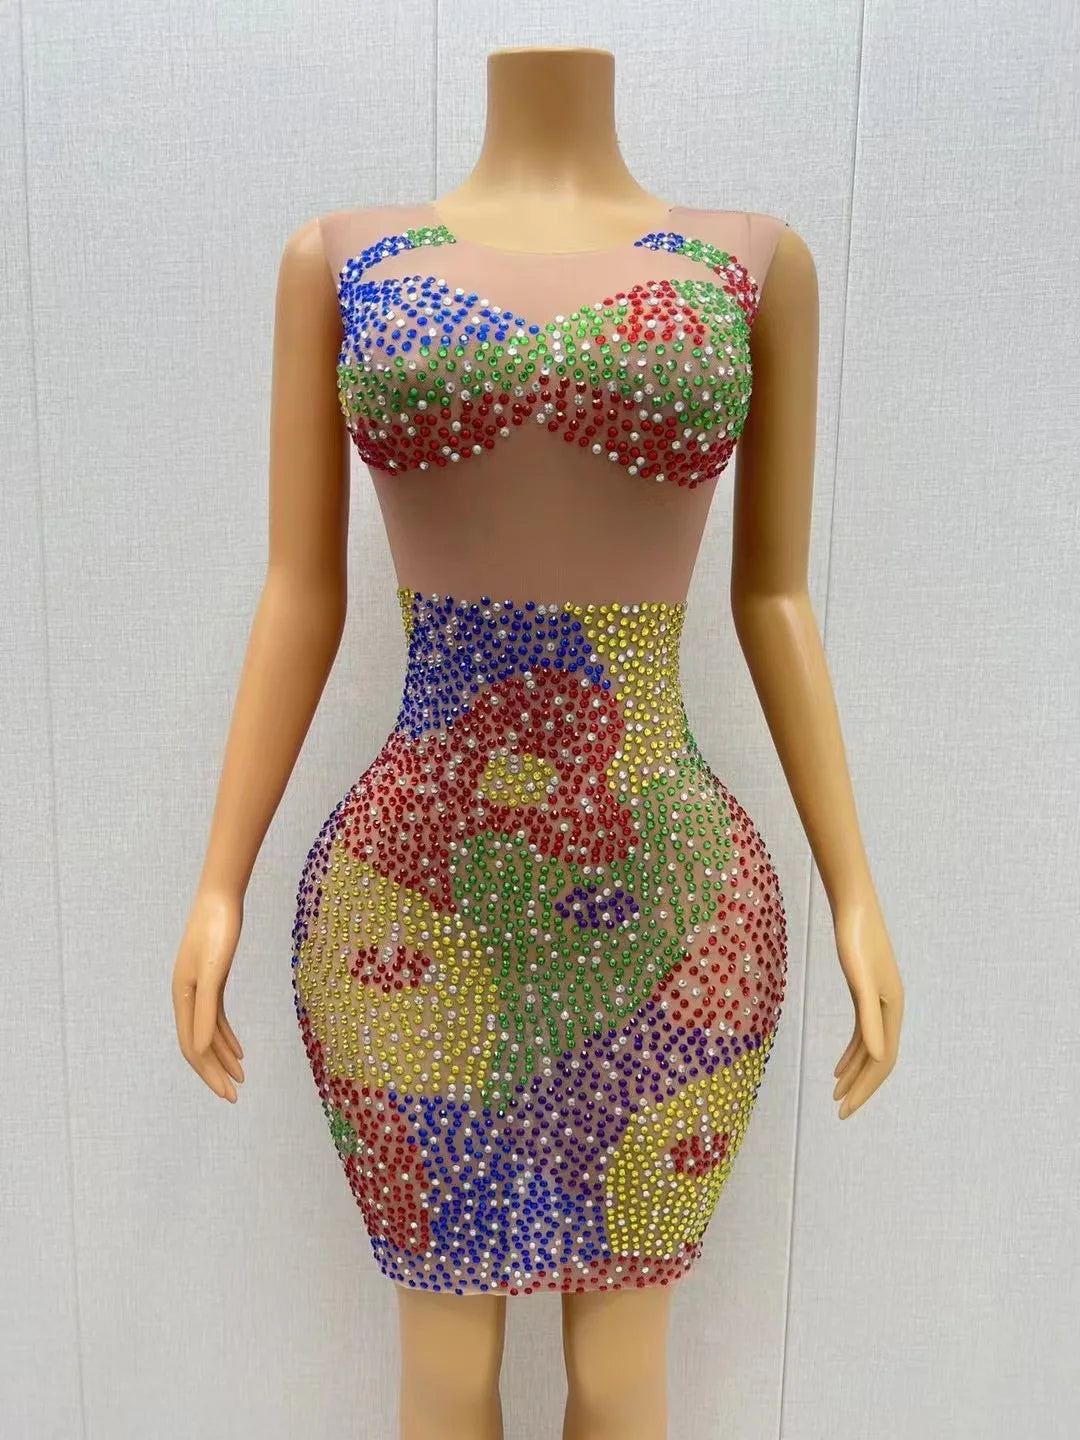 Sexy Stage Colorful Rhinestones Transparent Crystals Sleeveless Dress Dance Evening Mesh Costume Prom Party Birthday Outfit